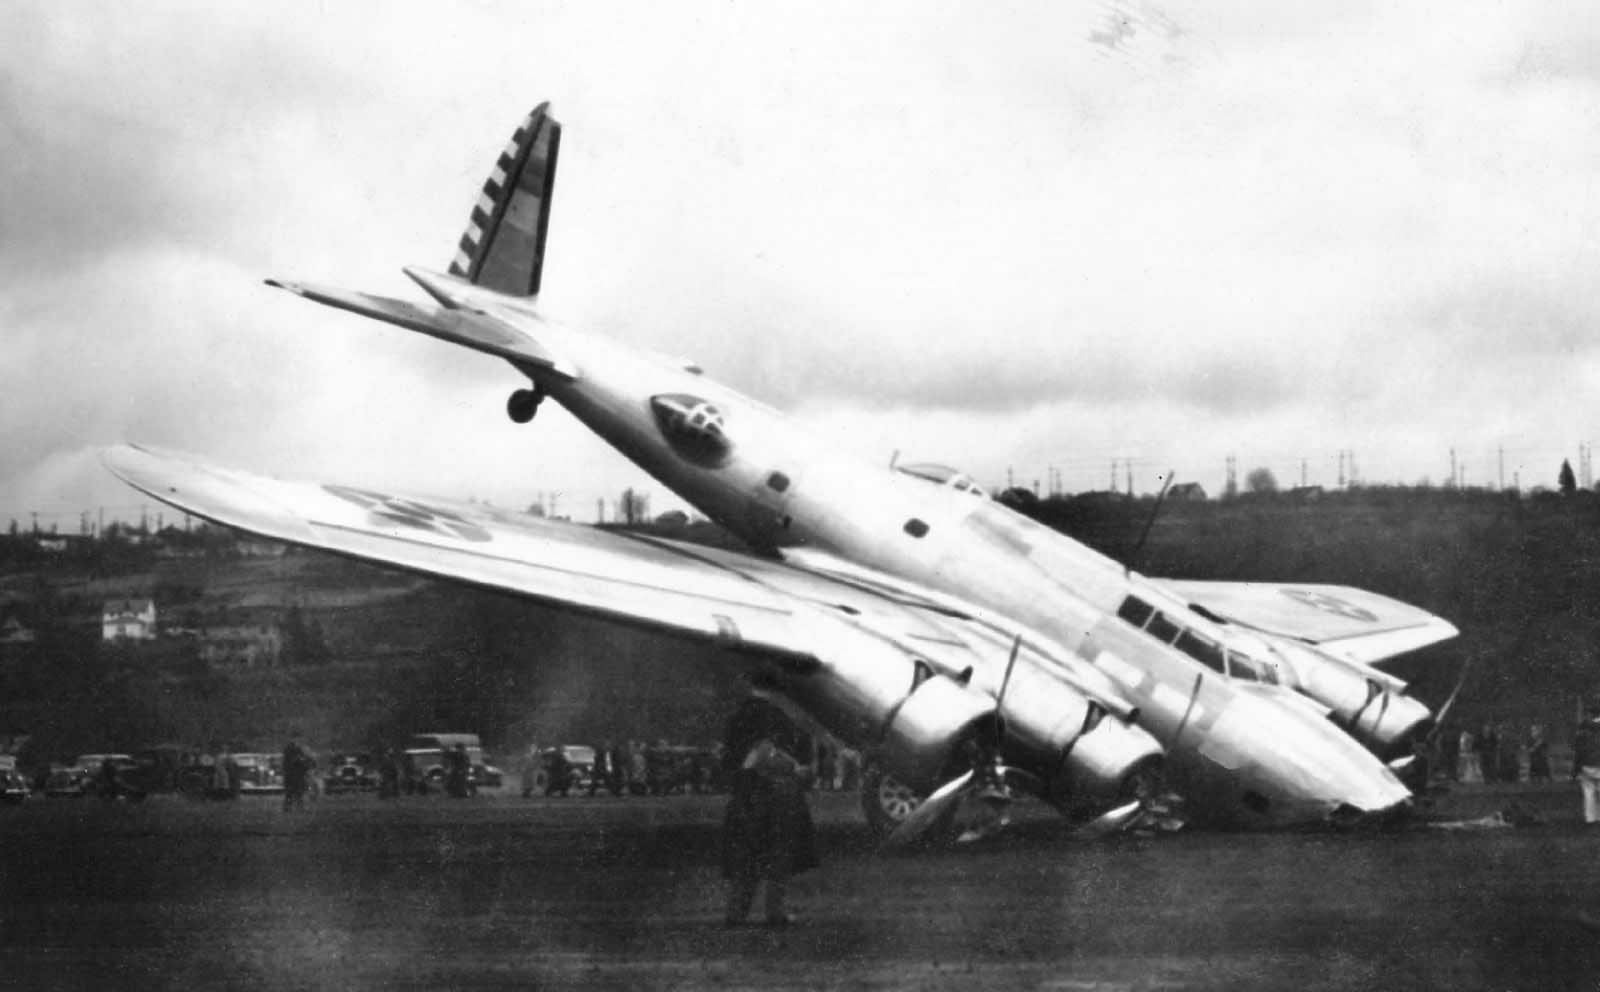 Boeing YB-17 36-149 nosed over on landing at Seattle, 7 December 1936. (Unattributed) 